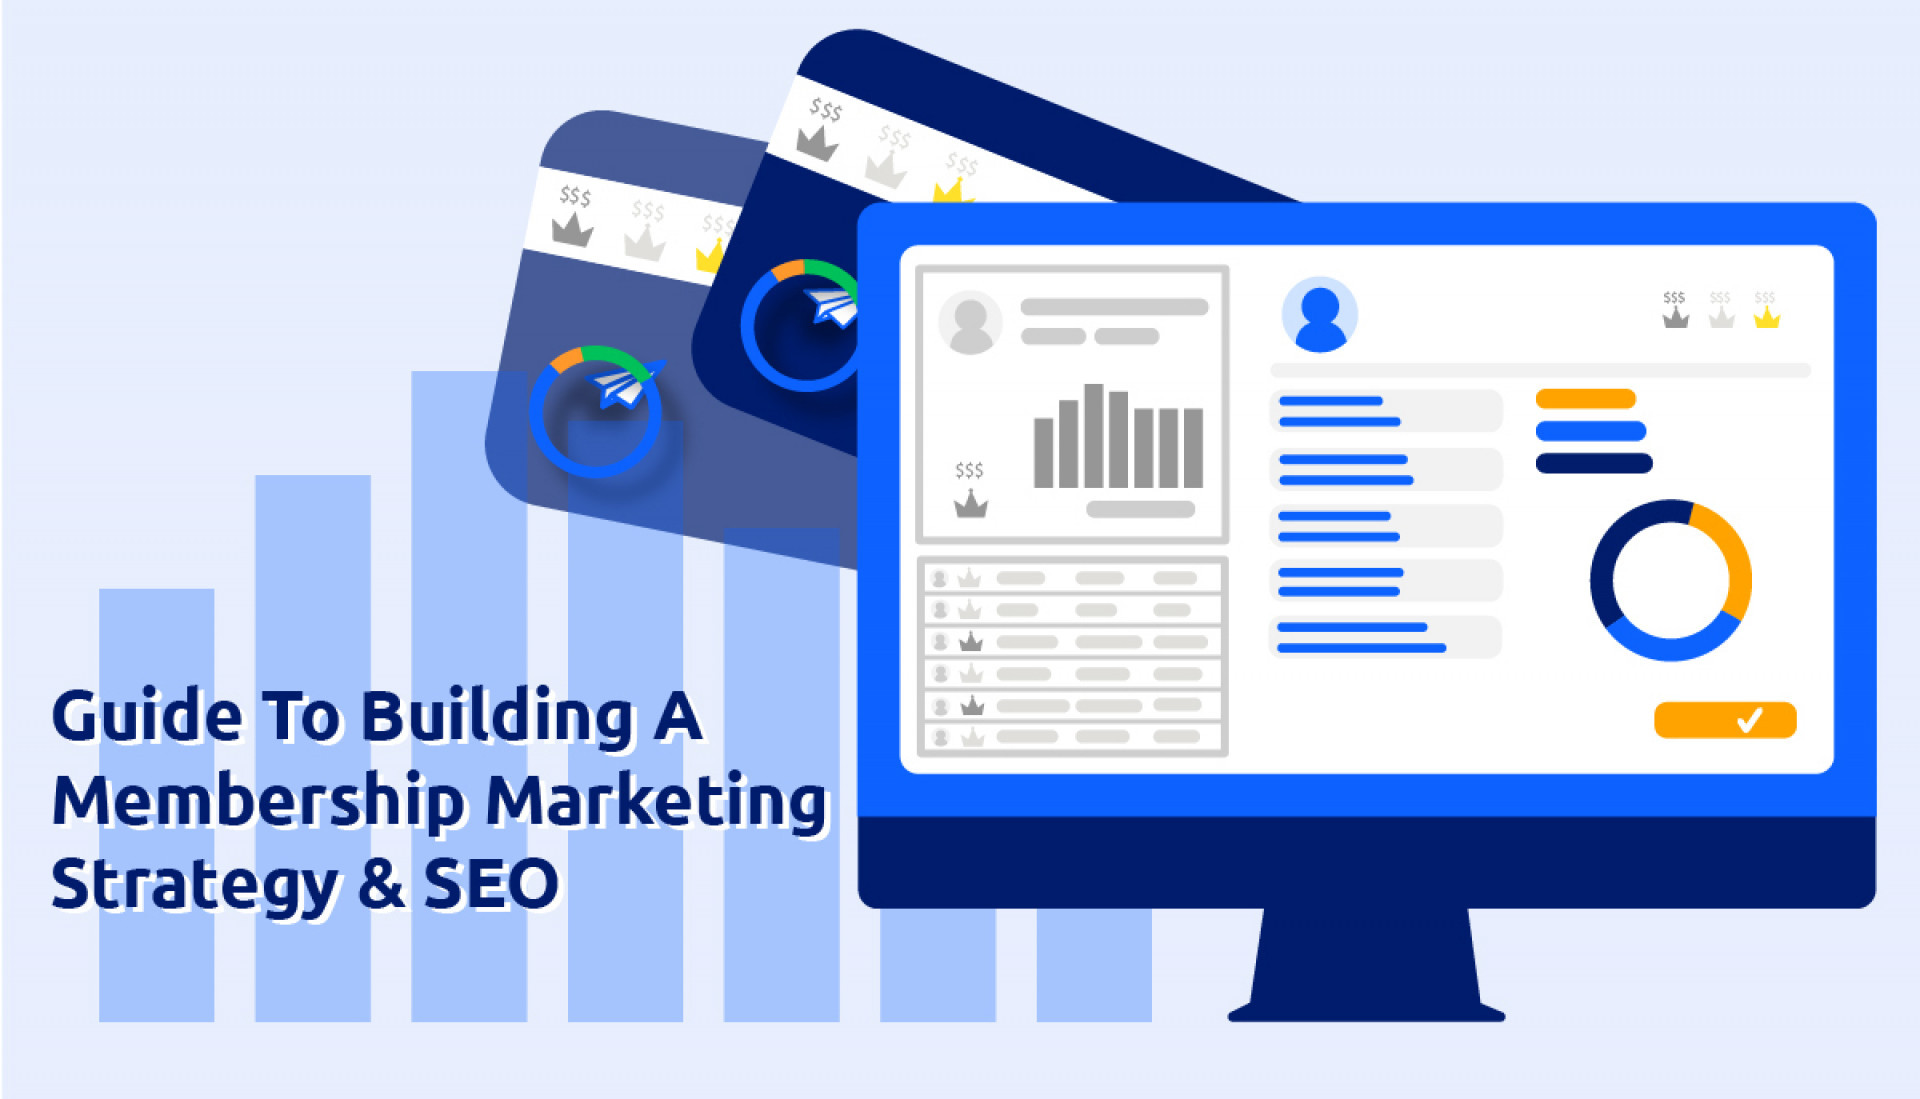 Guide To Building A Membership Marketing Strategy & SEO